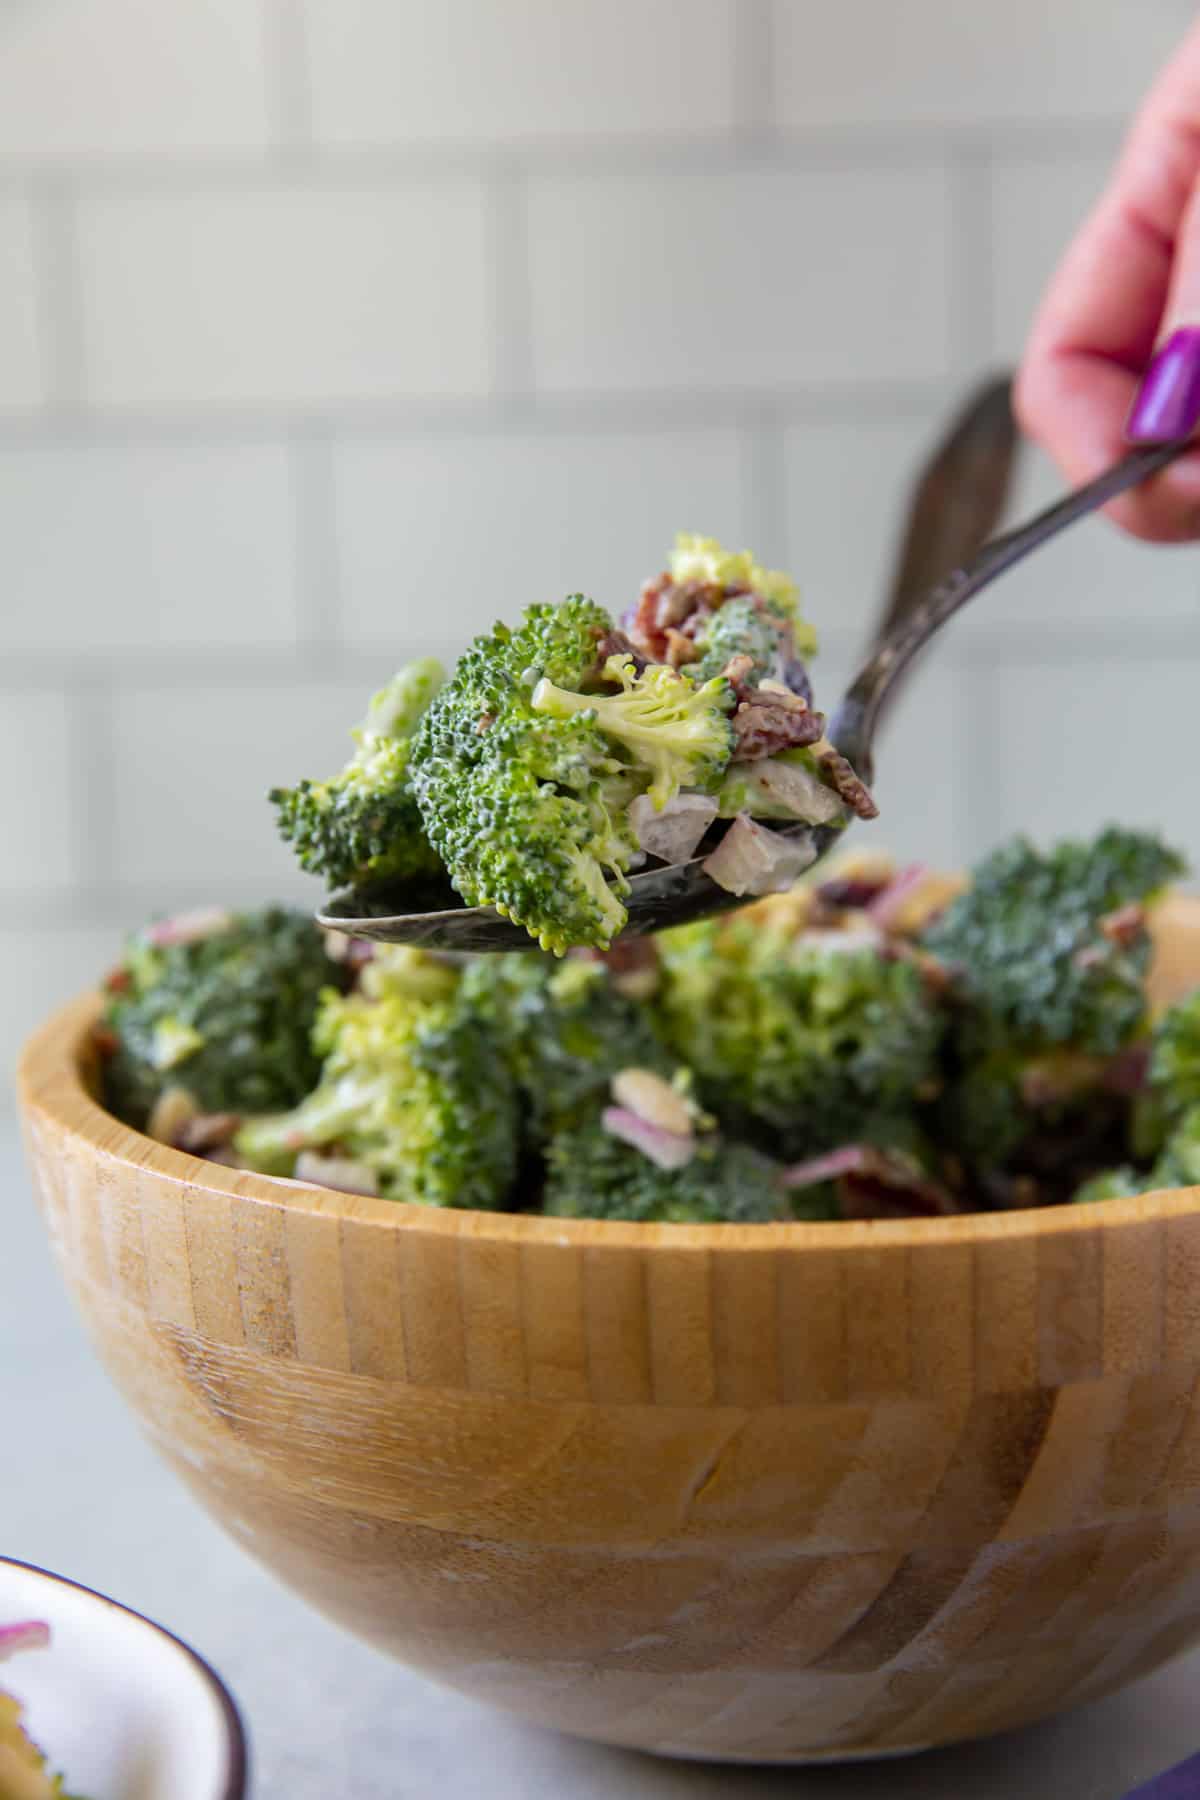 A spoon lifts a scoop of Broccoli Salad from a wooden bowl.